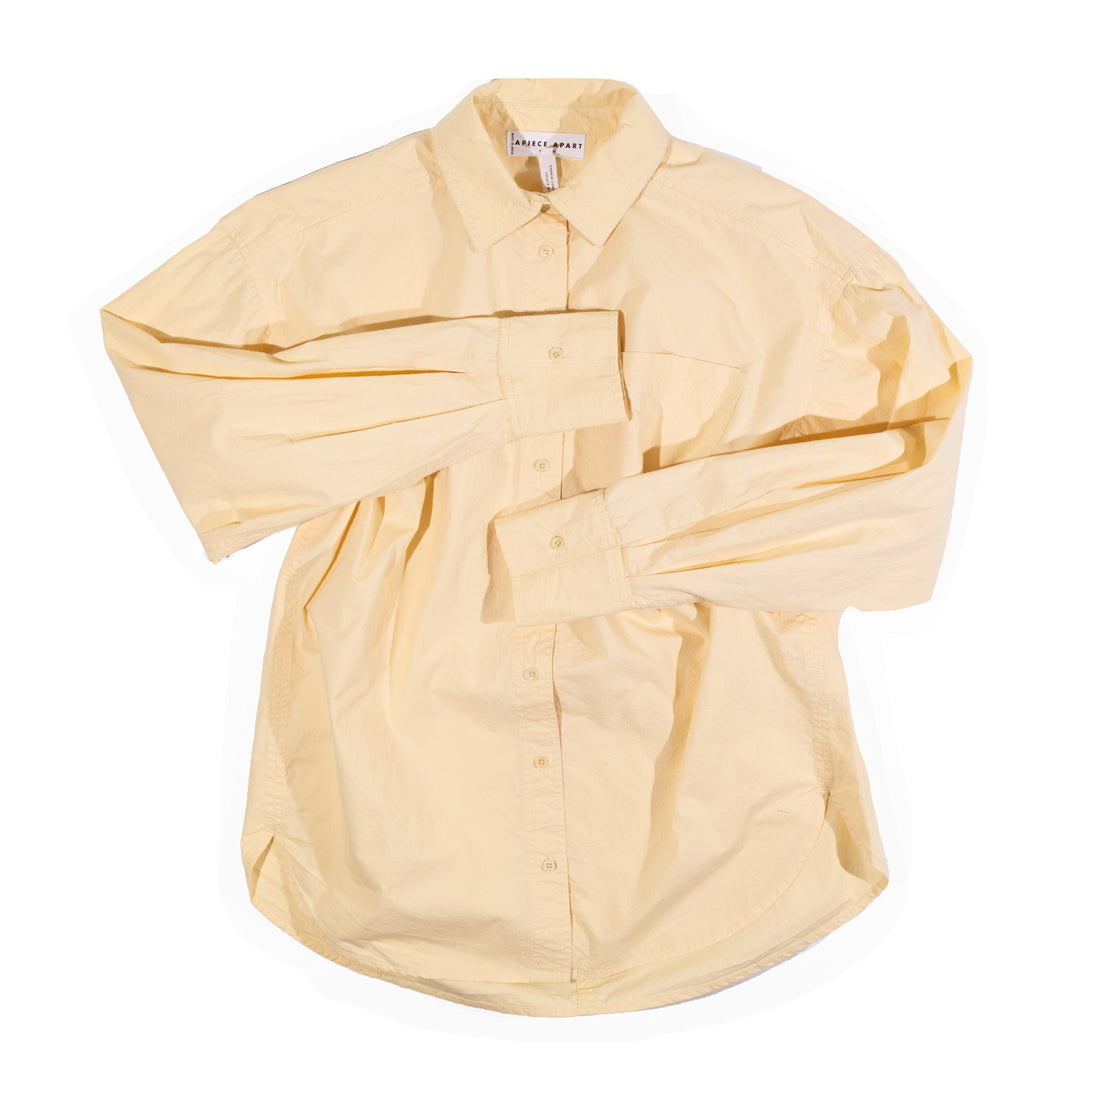 Apiece Apart Oversized Button Up in Sunny